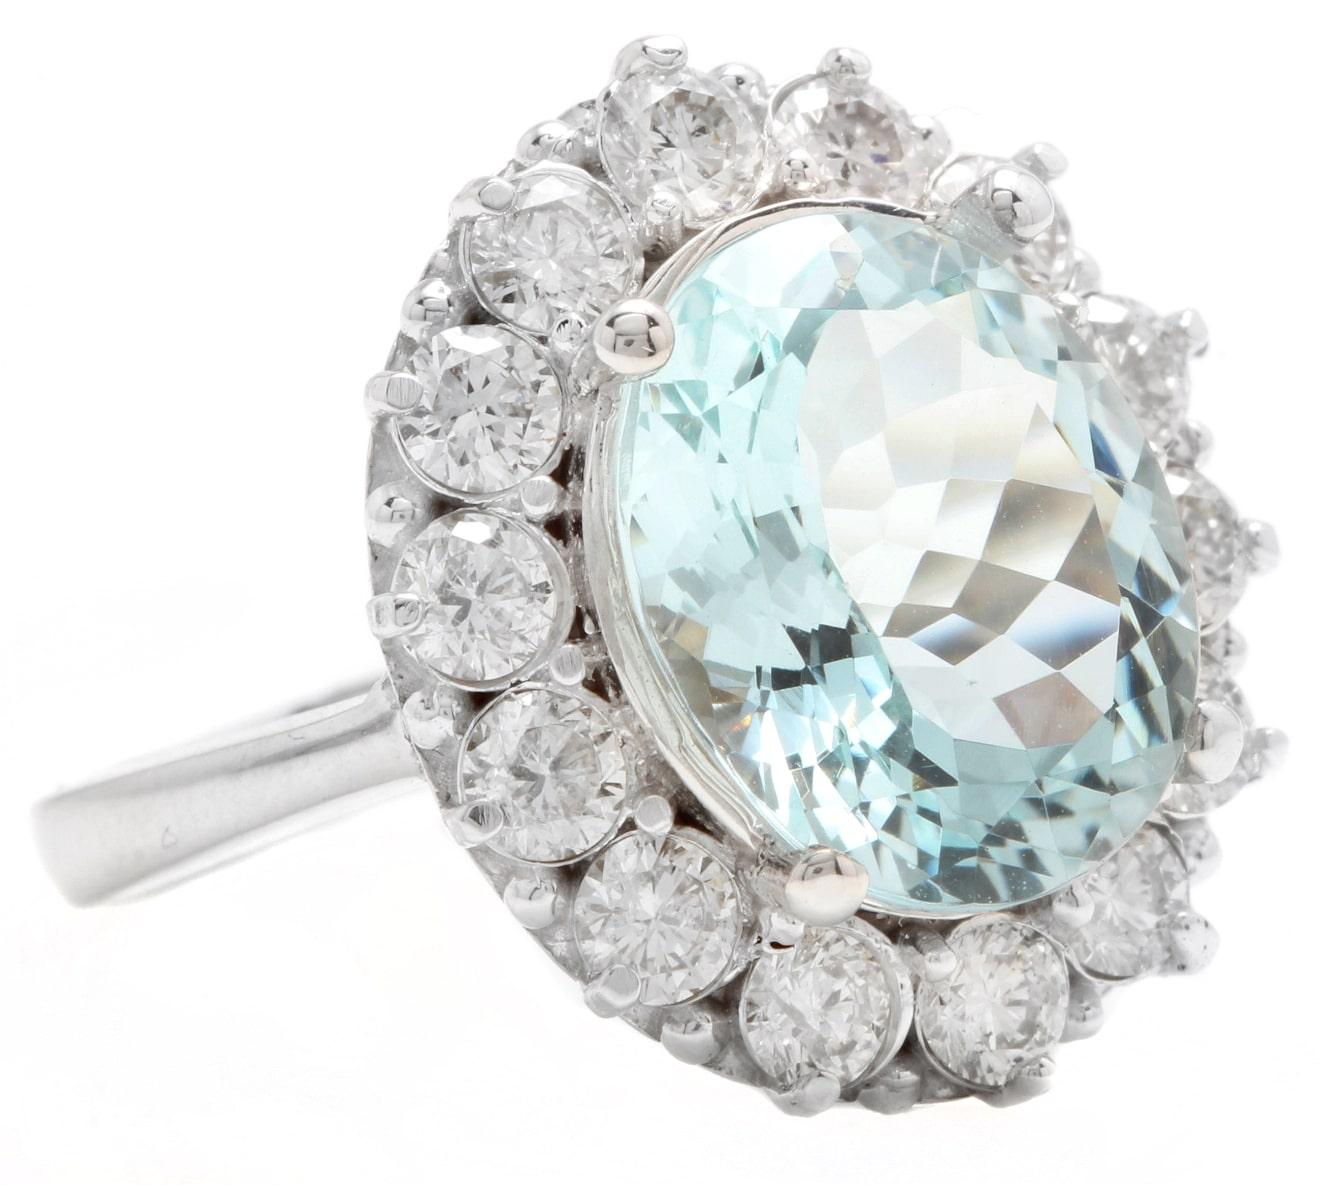 6.15 Carats Natural Aquamarine and Diamond 14K Solid White Gold Ring

Suggested Replacement Value: $5,500.00

Total Natural Oval Cut Aquamarine Weights: 5.00 Carats 

Aquamarine Measures: 12.00 x 10.00mm

Natural Round Diamonds Weight: 1.15 Carats